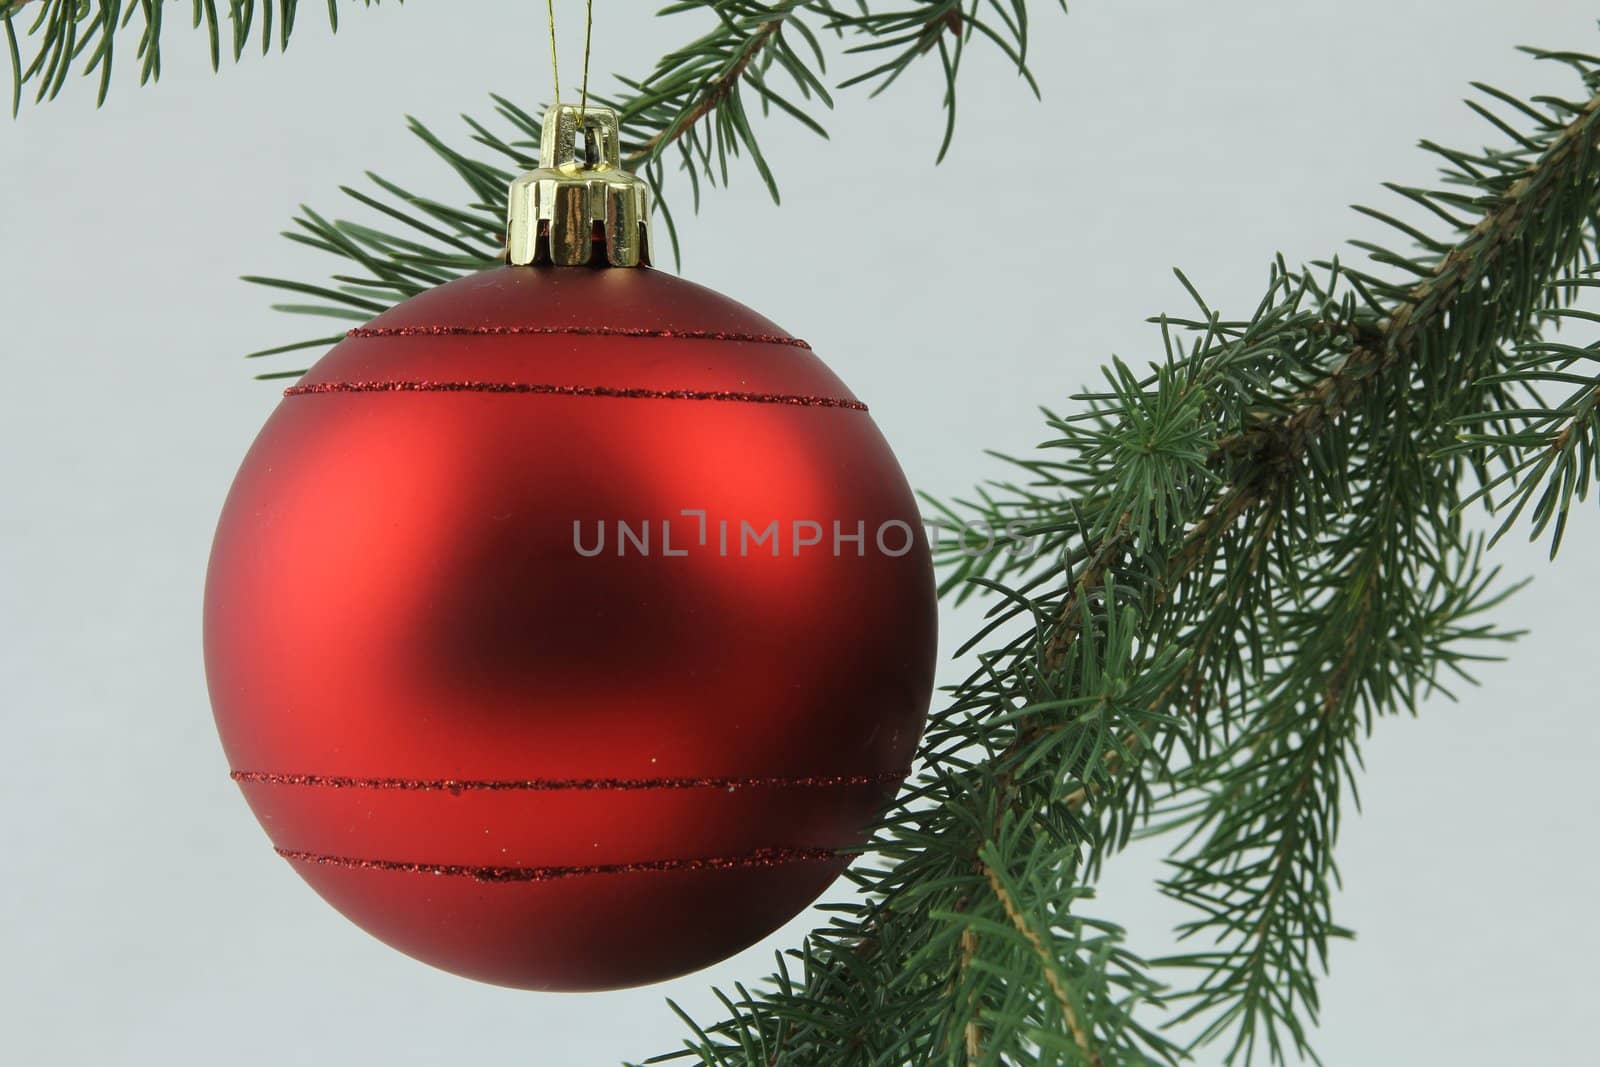 Red bulb hanging on Christmas tree branches, with white background
